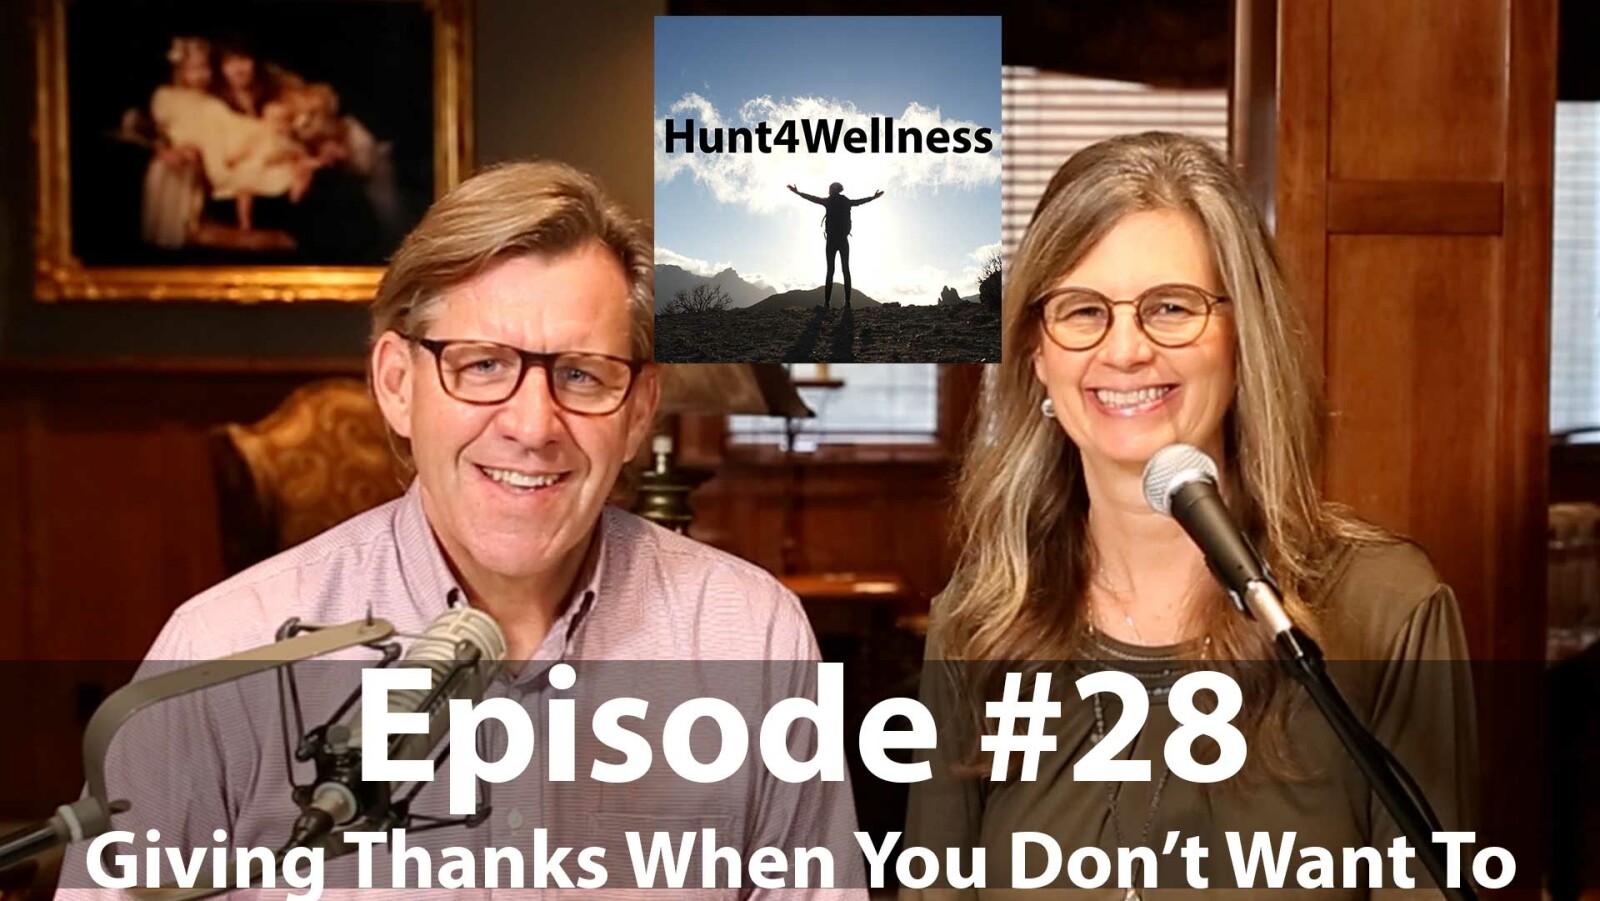 Episode #28 - Giving Thanks When You Don't Want To